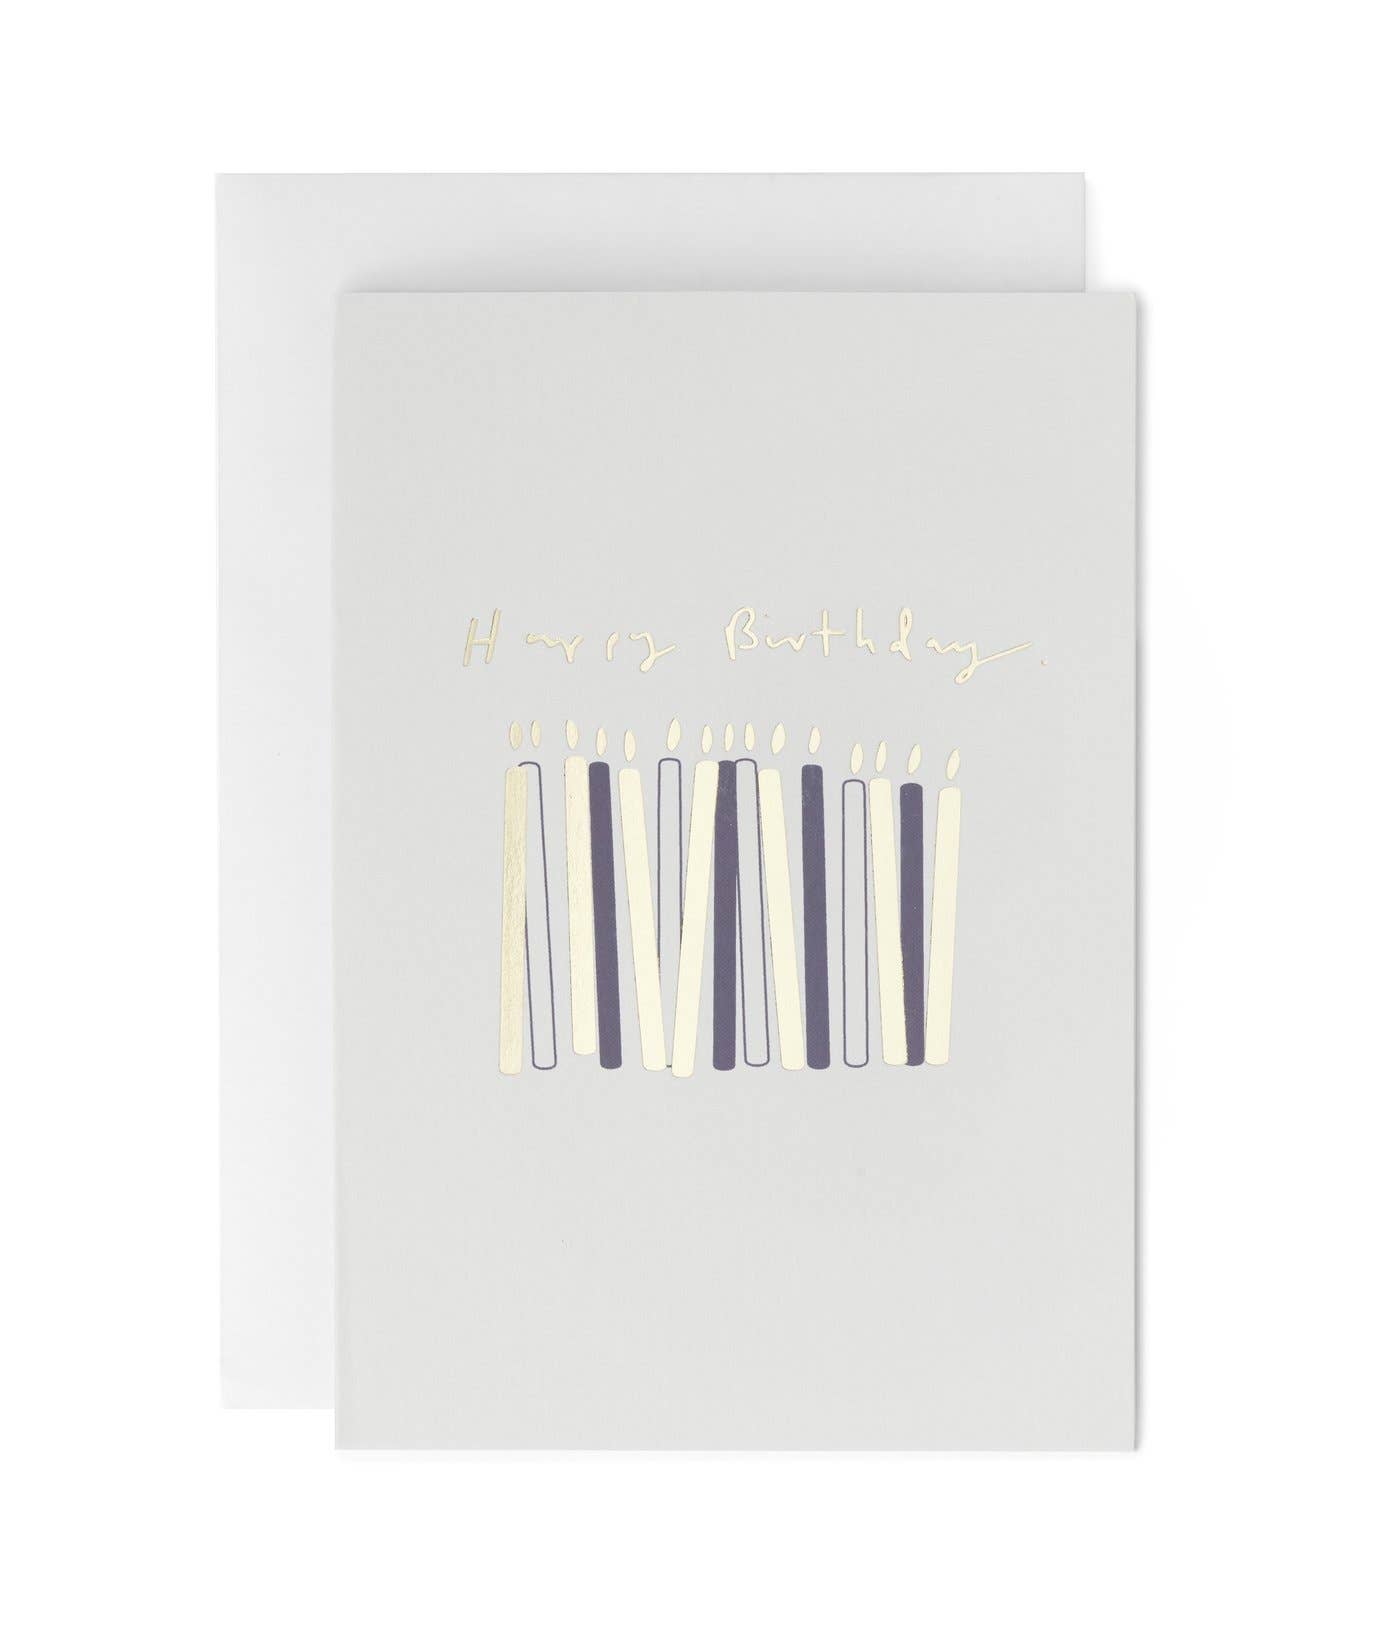 Happy Birthday Small Candles Card